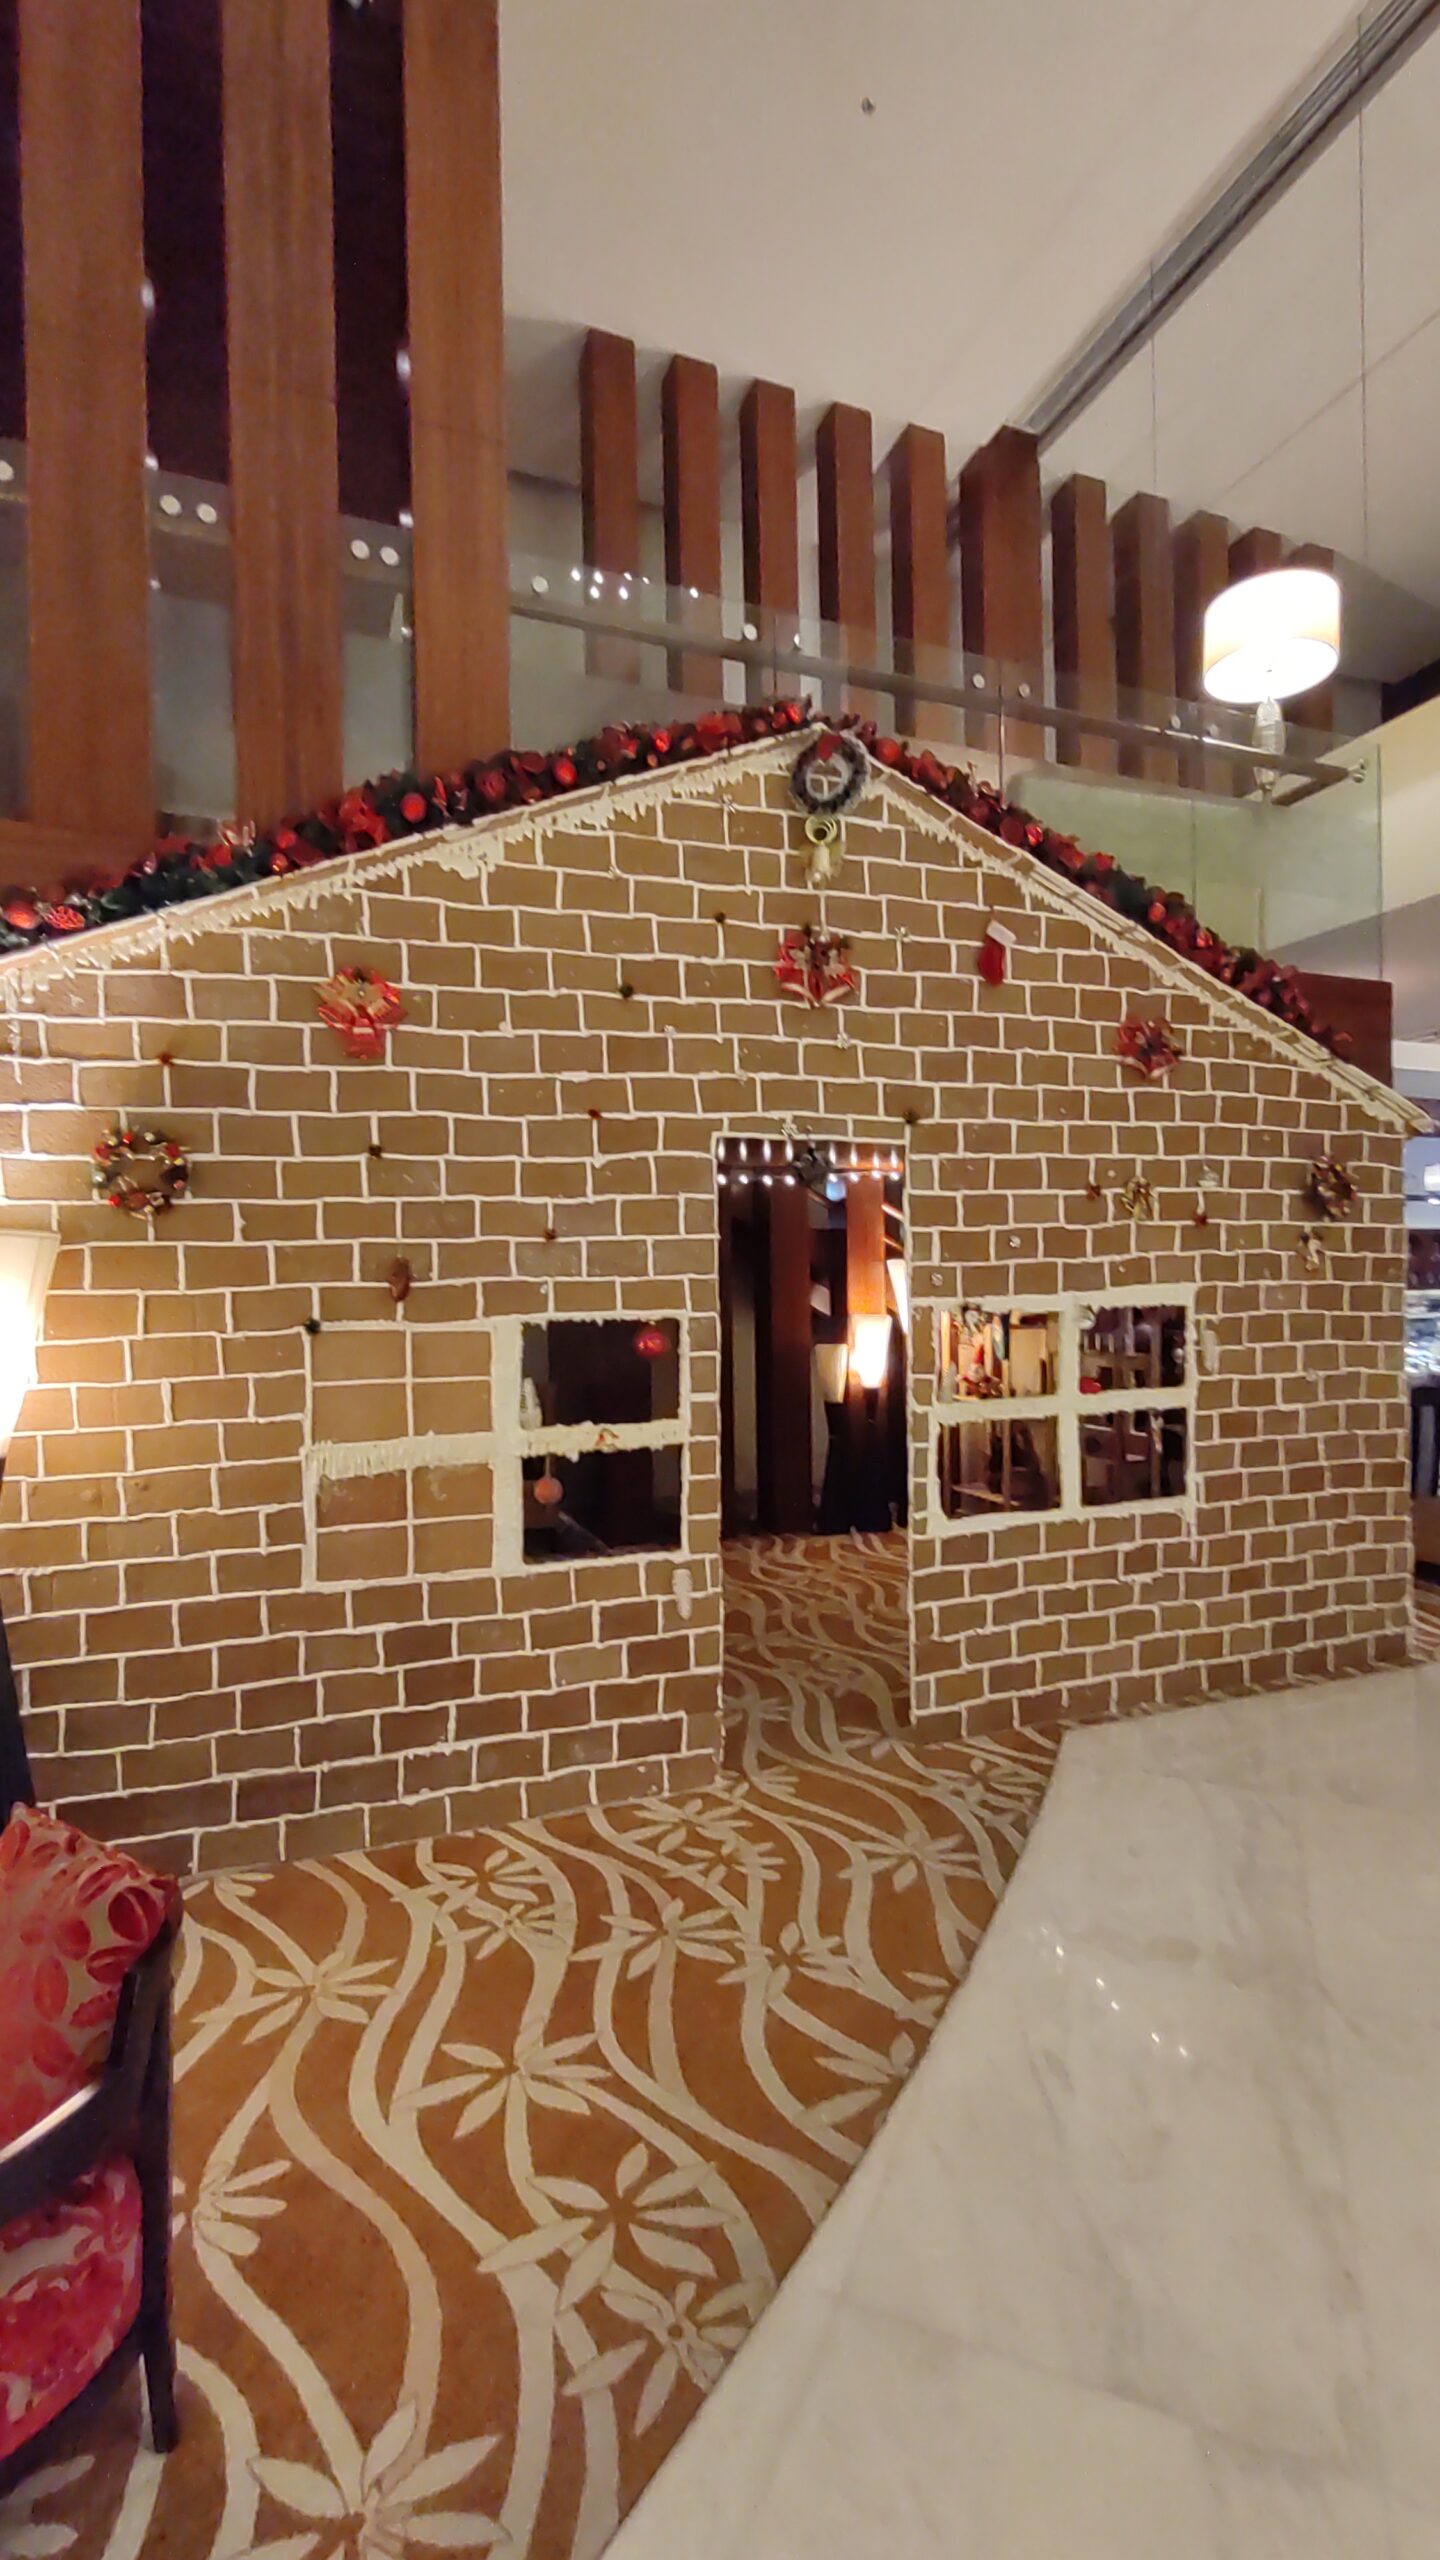 PICTURE OF THE GINGER BREAD HOUSE IN THE LOBBY.